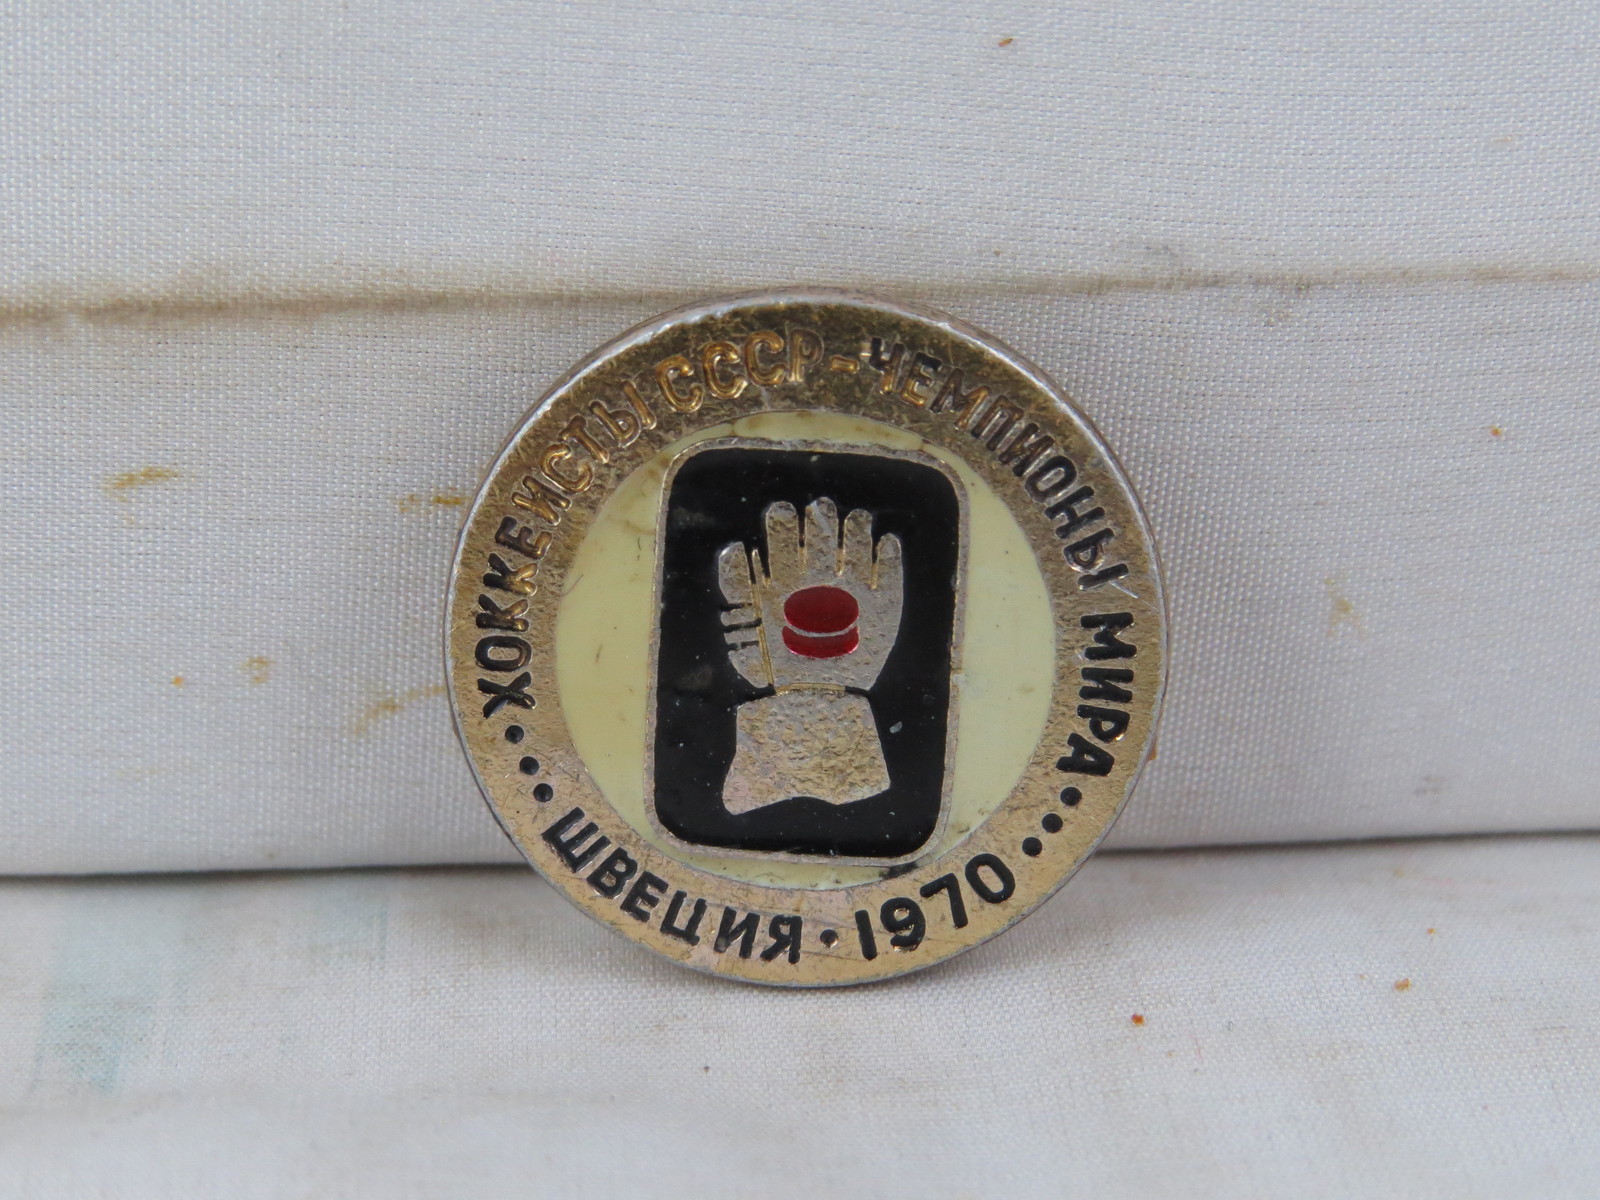 Primary image for Vintage Hockey Pin - Team USSR 1970 World Champions - Stamped Pin 